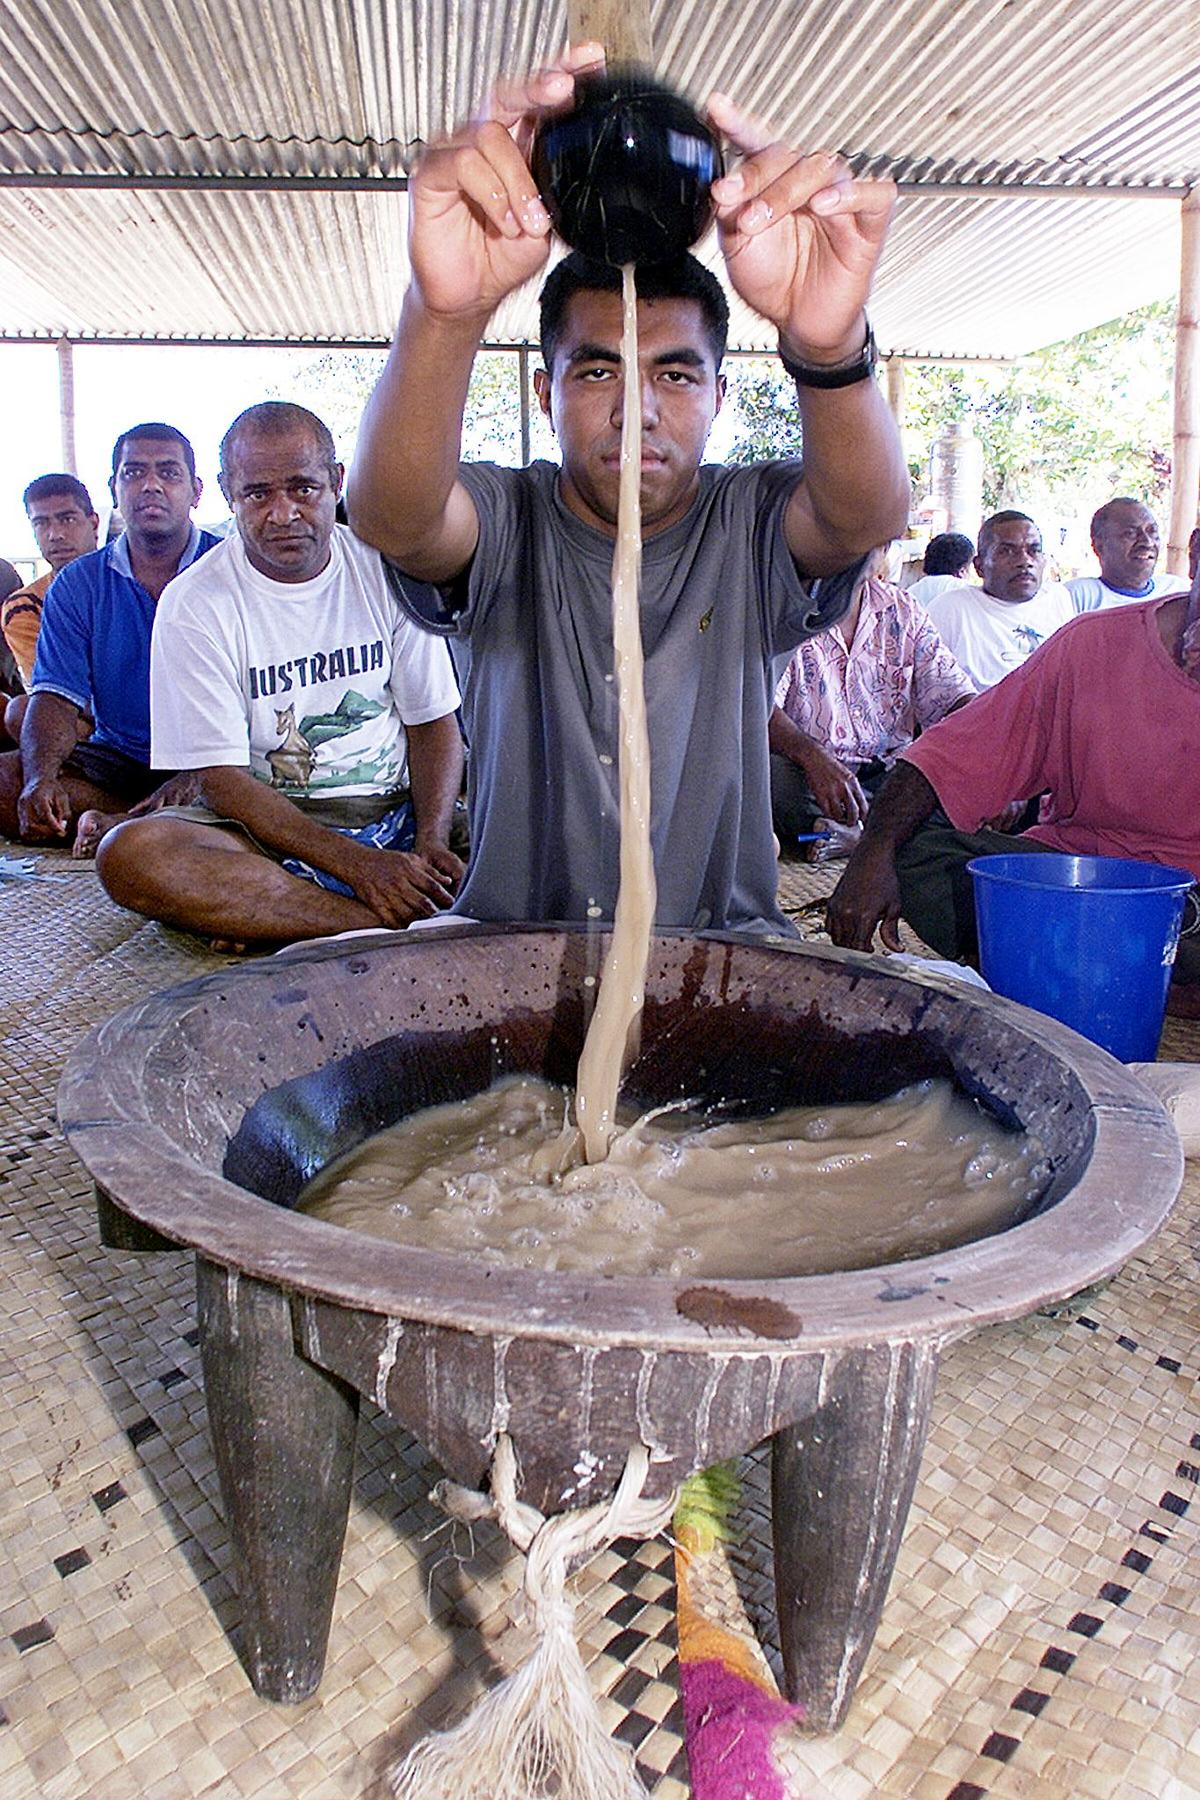 Jone Levaci (C) of coup leader George Speight's SVT Party mixes laqona beverage, also known as kava, for the party's faithful at a polling booth in Suva, 31 August 2001. (Torsten Blackwood/AFP/Getty Images)